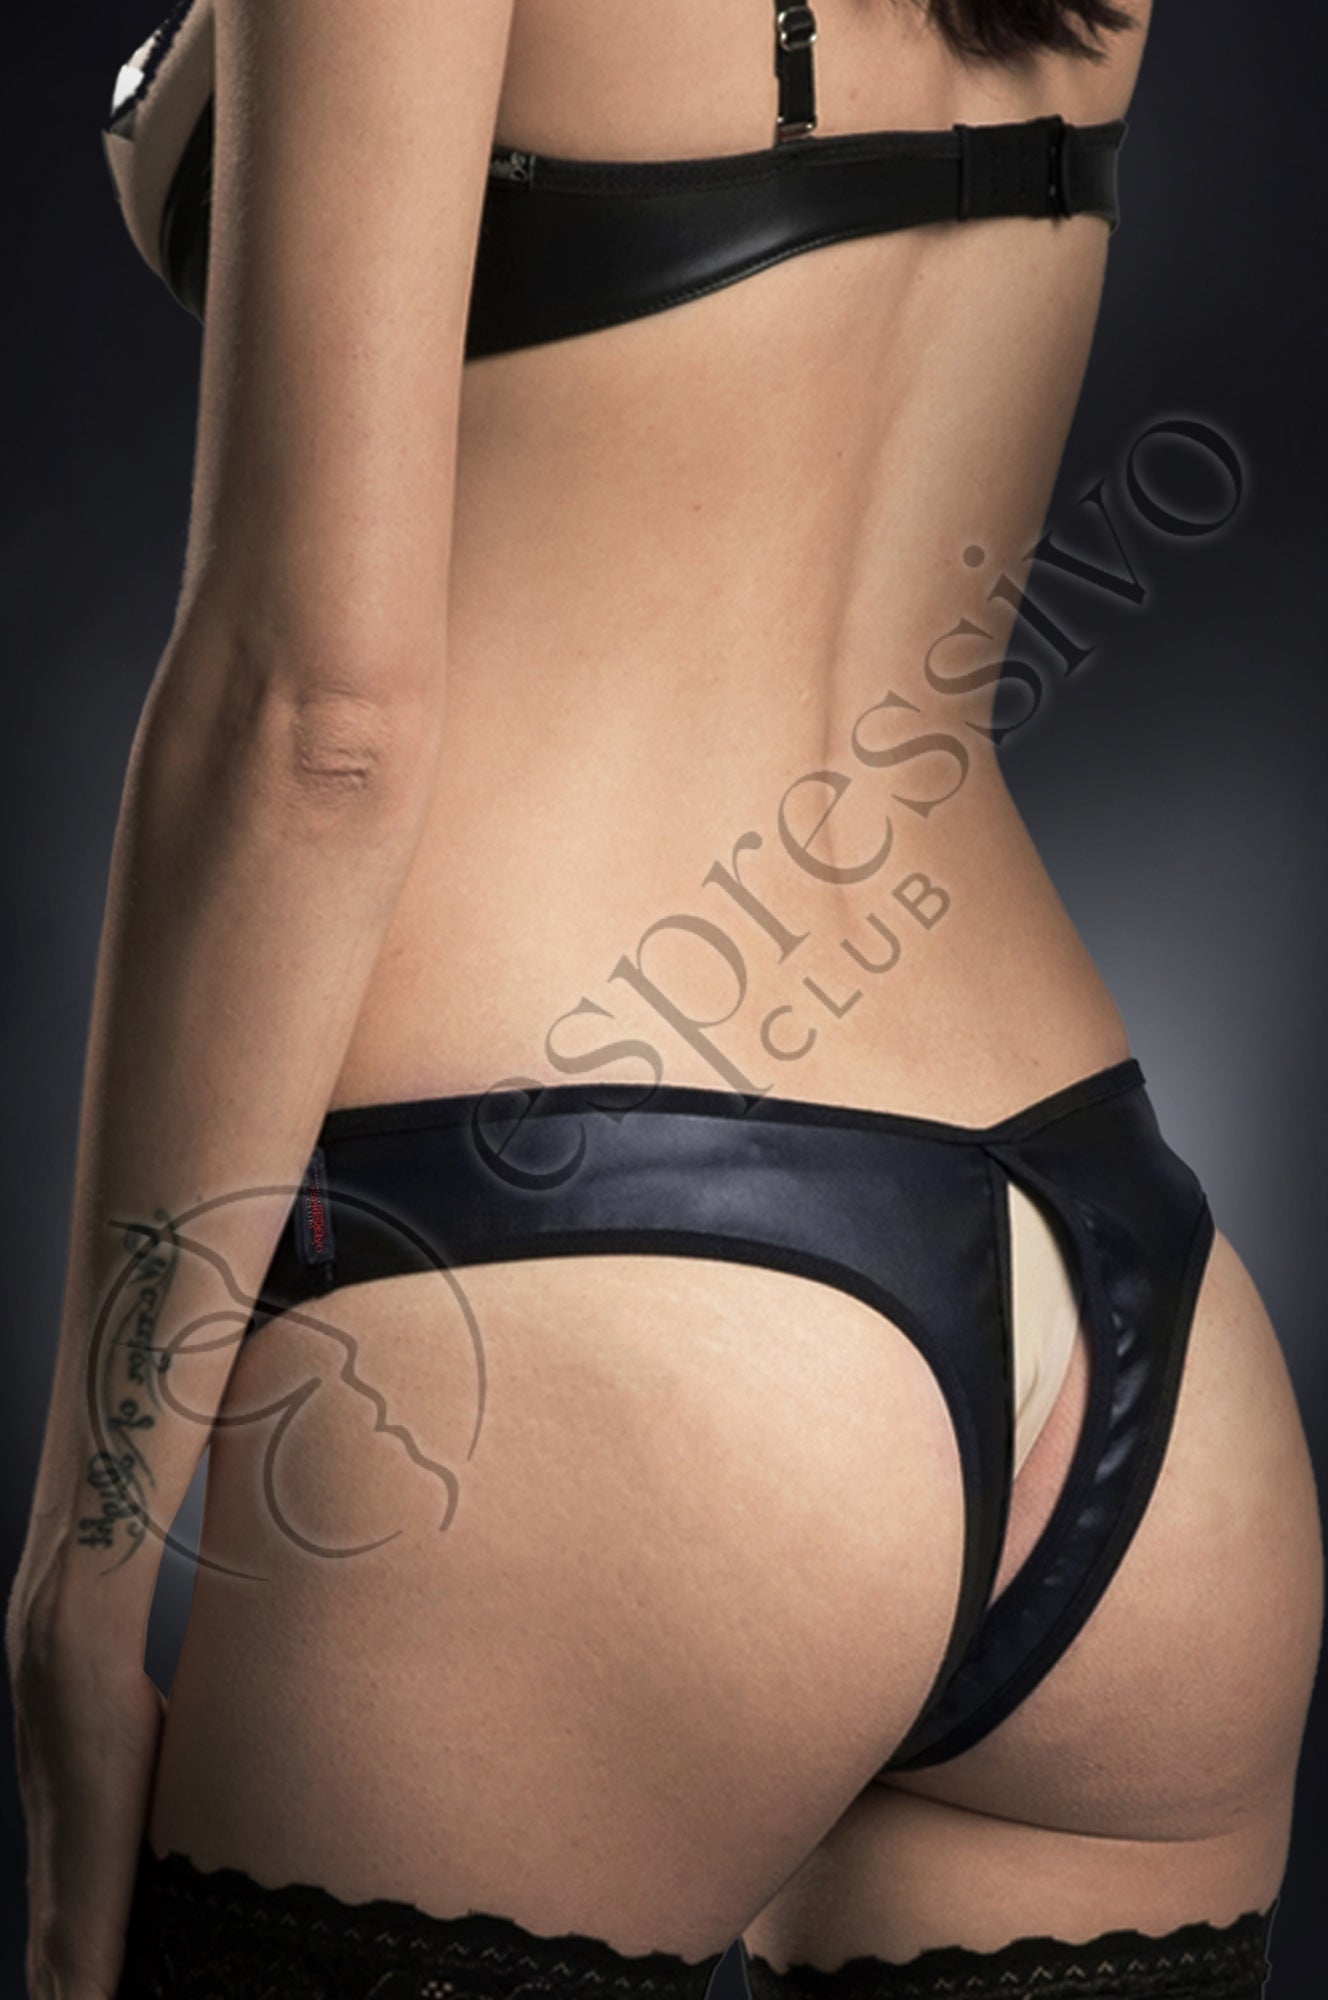 Womens Crotchless Vegan Leather Thong Lingerie